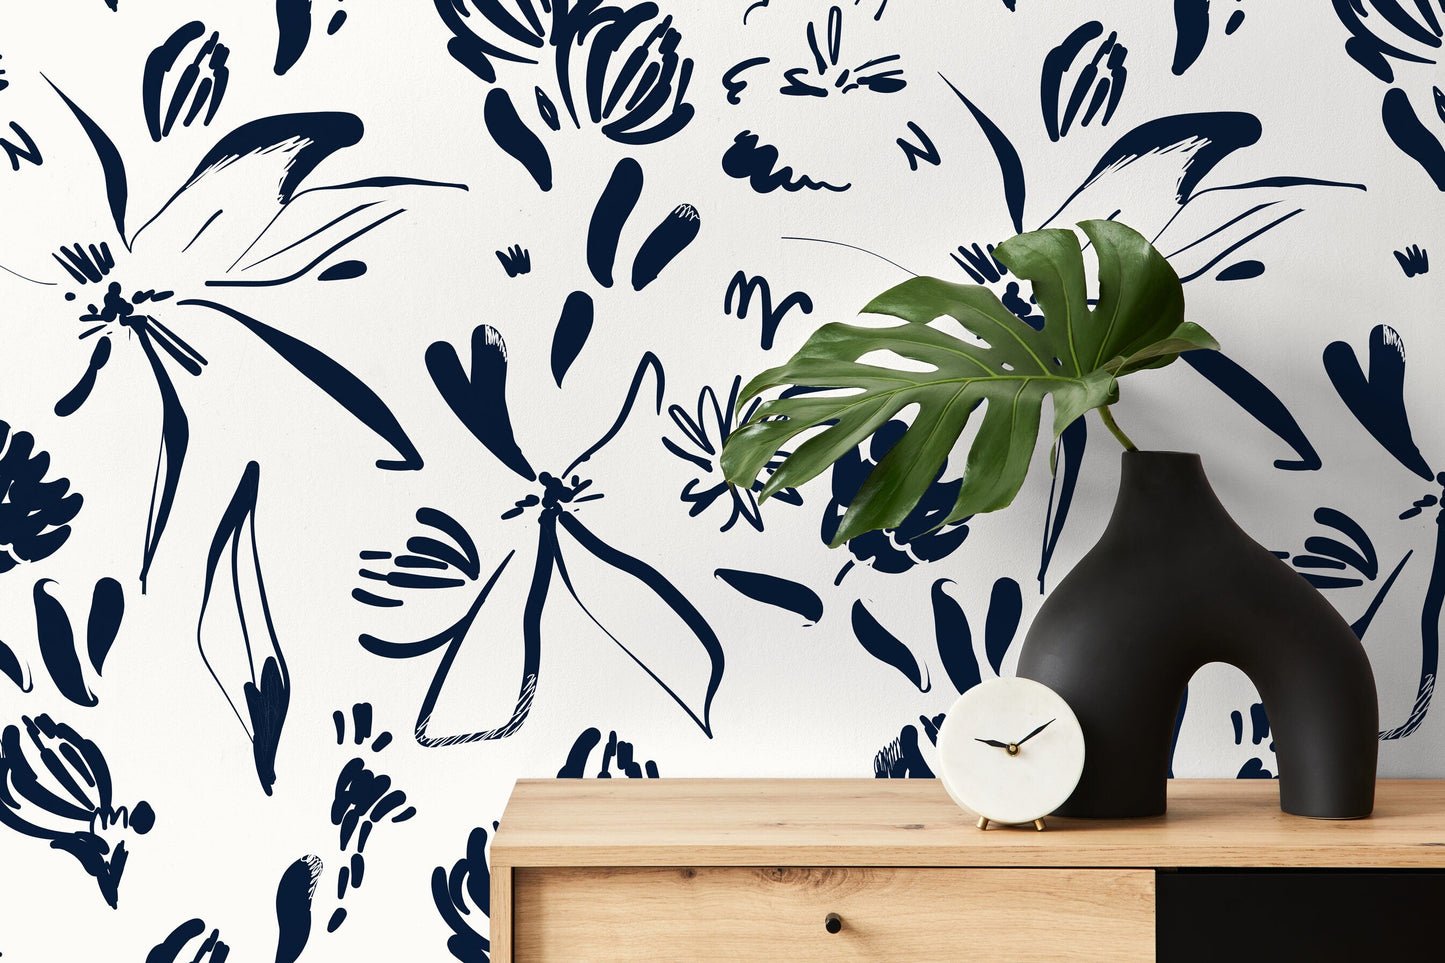 Wallpaper Peel and Stick Wallpaper Removable Wallpaper Home Decor Wall Art Wall Decor Room Decor / Navy Contemporary Boho Wallpaper - C383